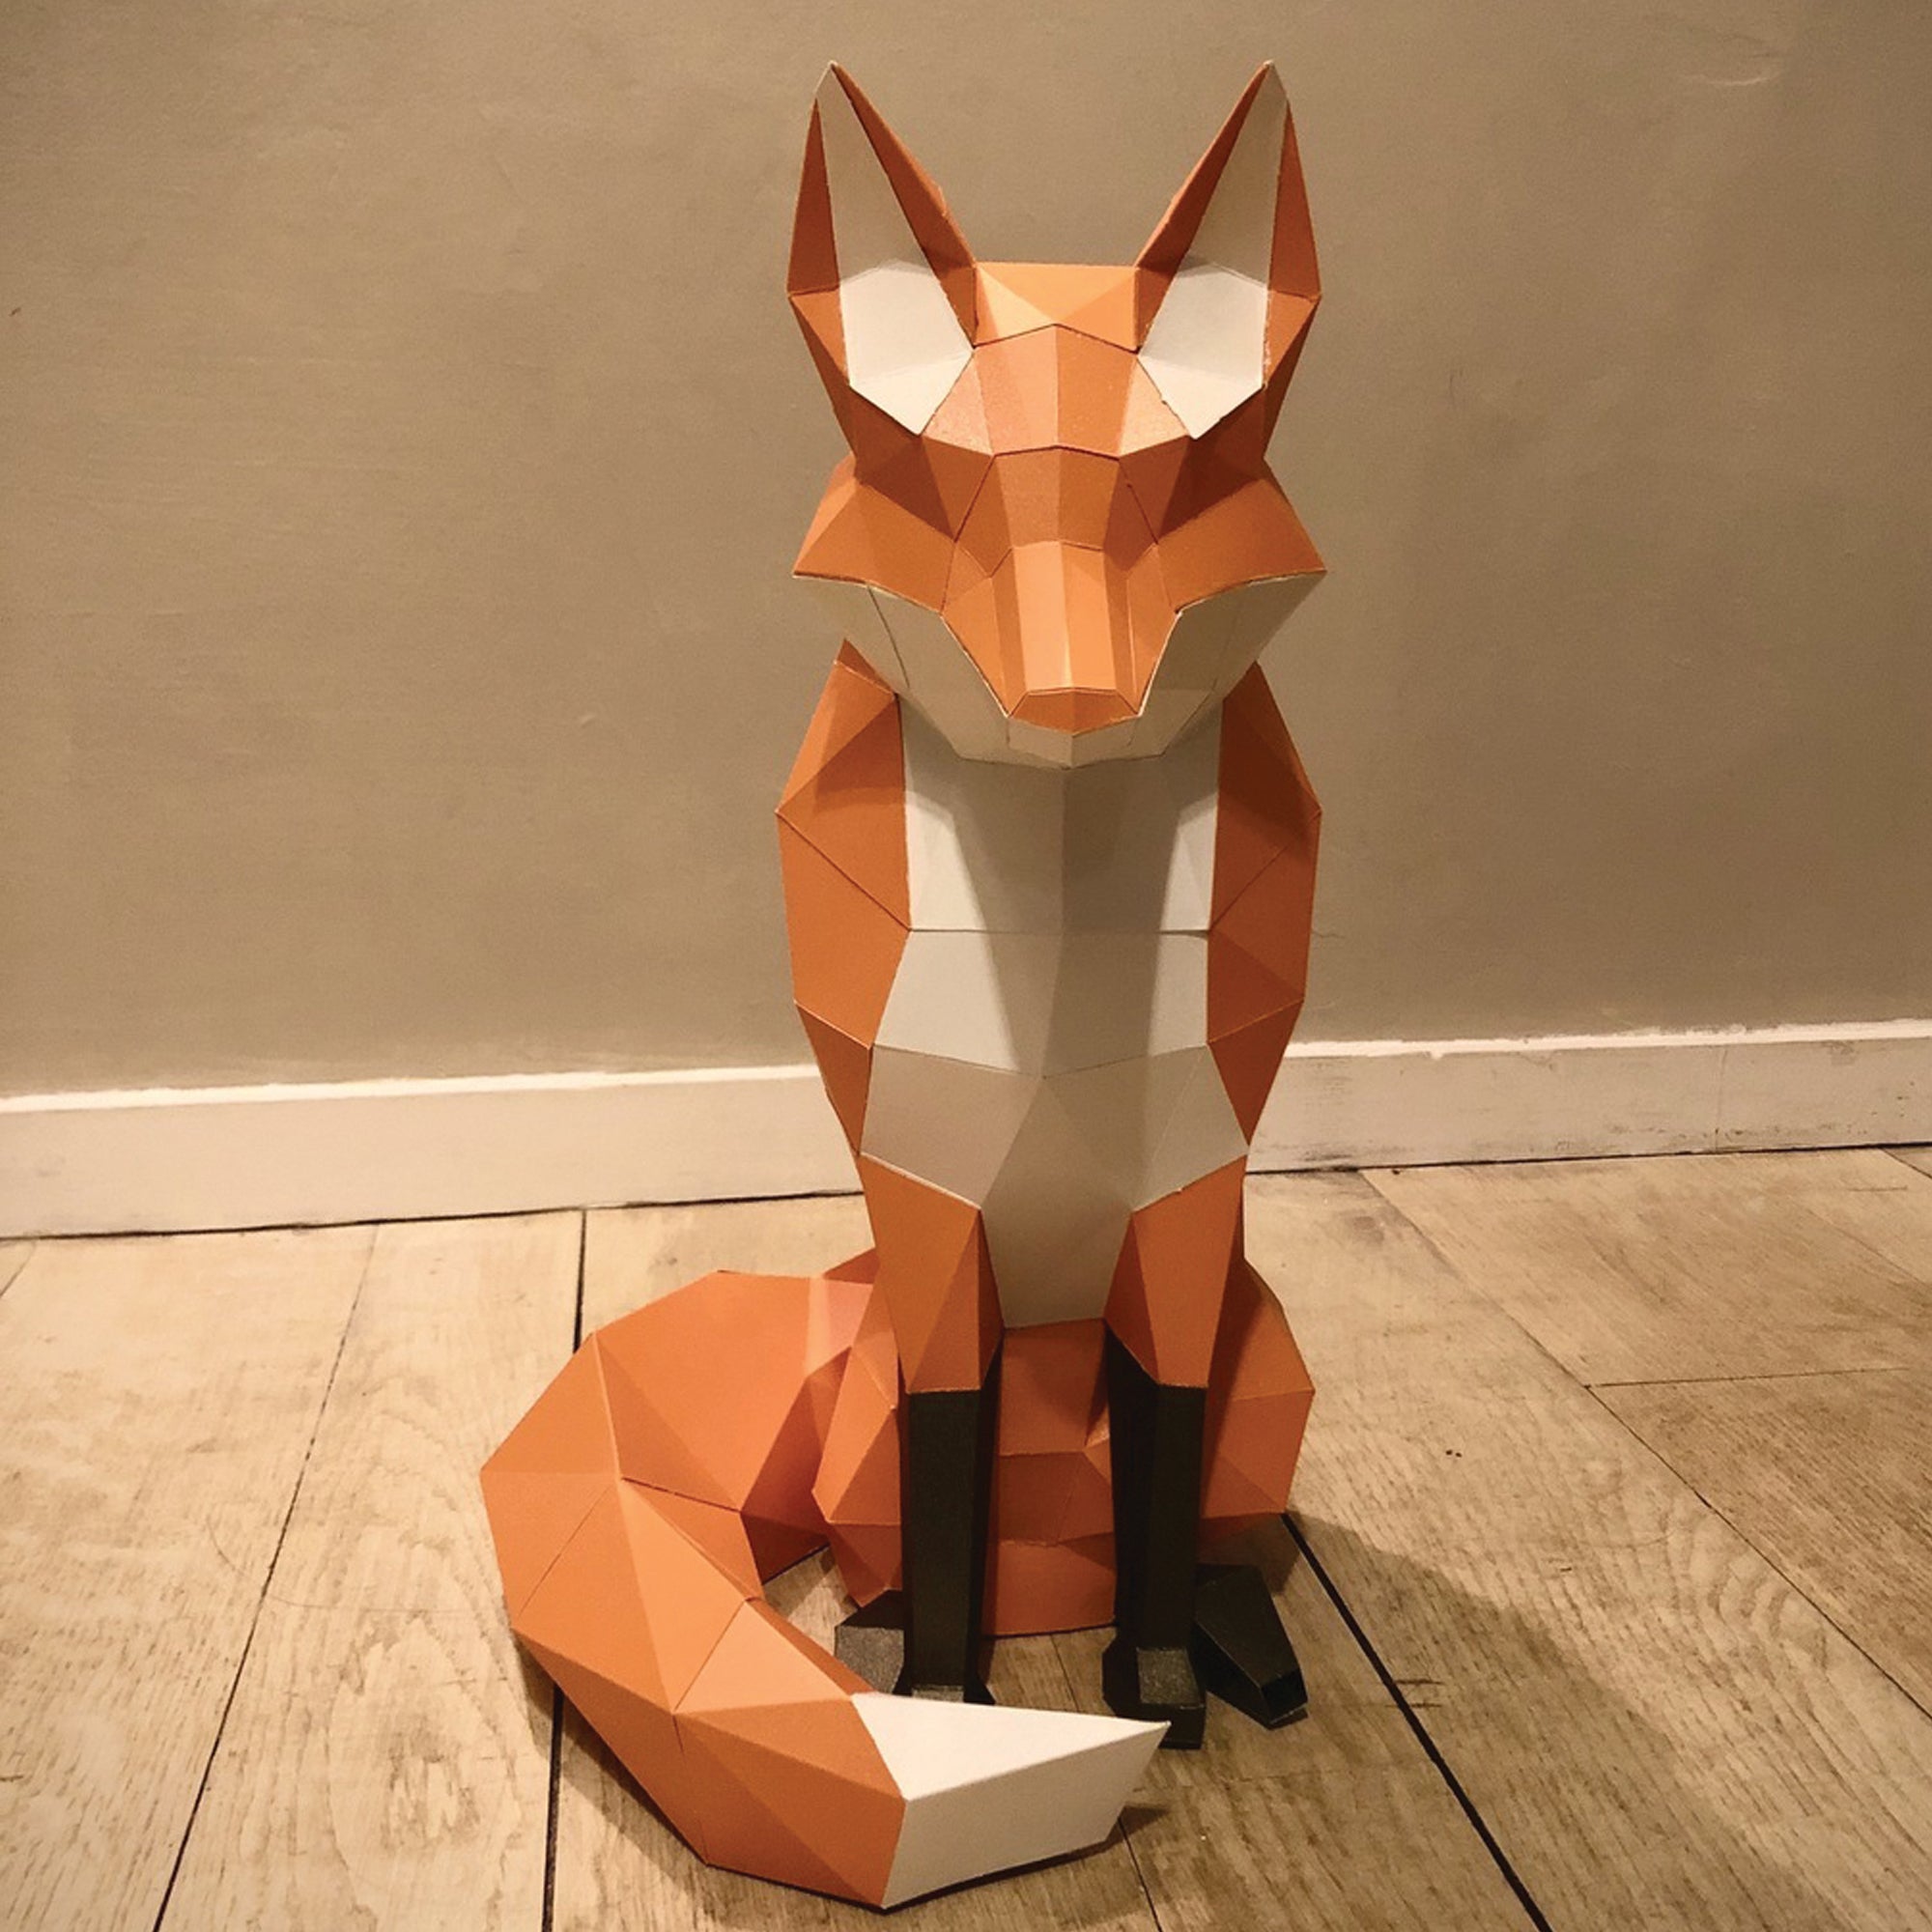 Papercraft fox with a dark beige wall behind and a wood floor underneath. Geometrical-shaped fox that is folded and cut paper pieces glued together. Fox is mainly a dark orange with black paws and a white chest, chin area, inside ears, and tip of tail.